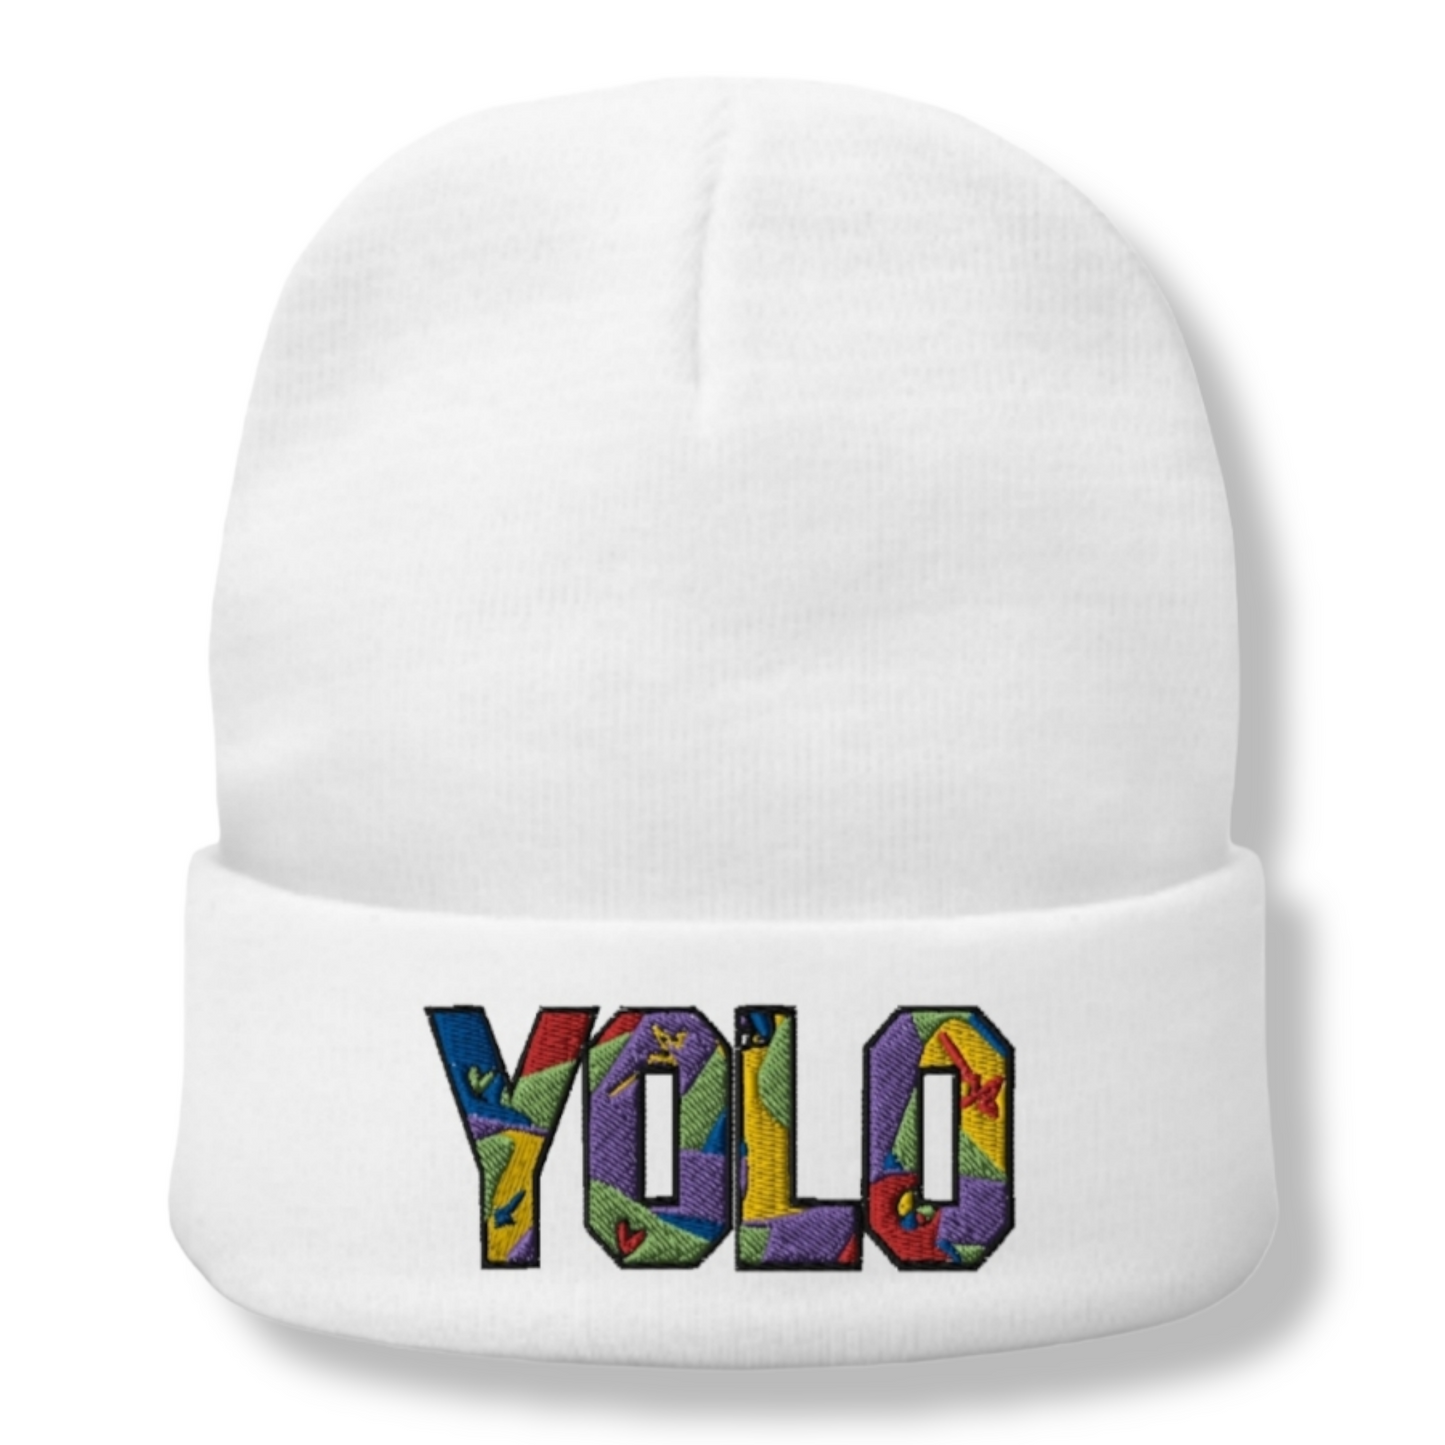 The YOLO LPL Beanie hat is both stylish, snug fitting, comfortable and warm. The cotton and acrylic blend creates a soft and pleasant feel.  • 60% cotton, 40% acrylic • Breathable cotton blend  One size fits most